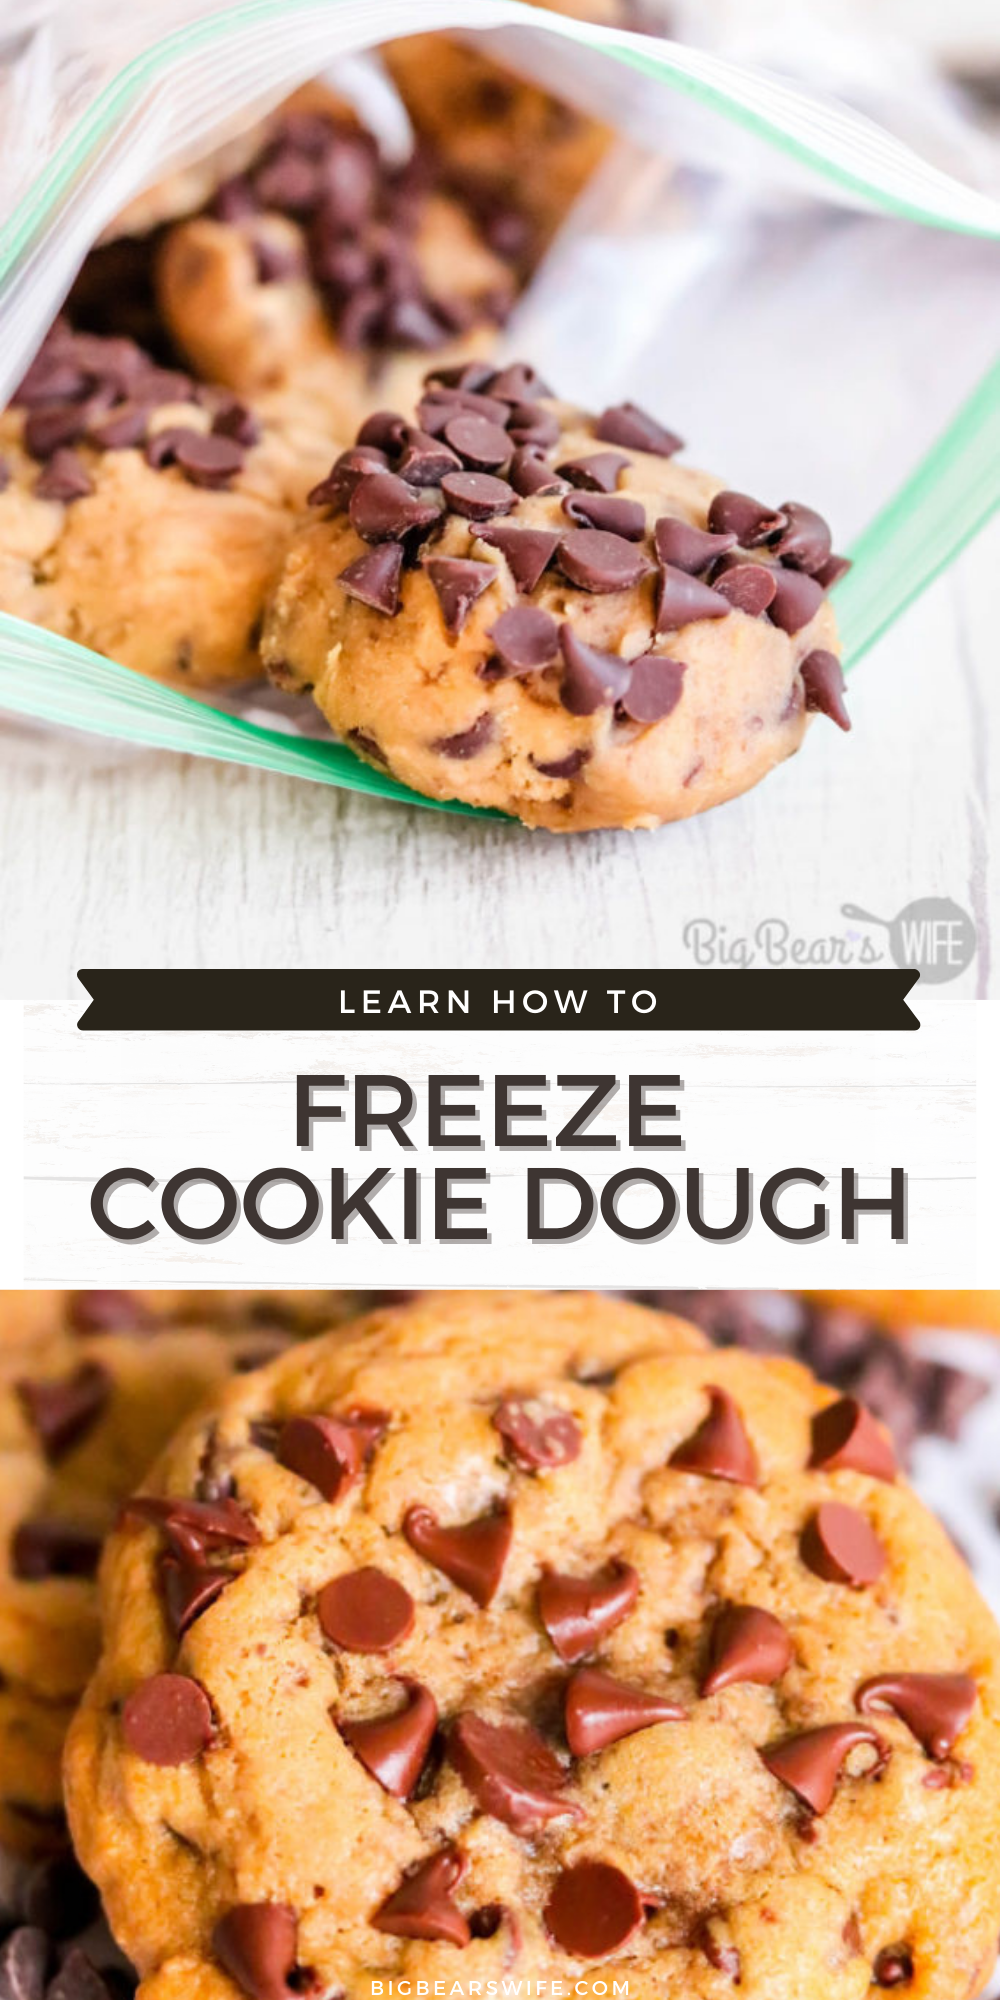 Freshly baked cookies are wonderful but sometimes you don’t want to bake up a couple dozen cookies just to enjoy one or two! Learn How to Freeze Cookie Dough for Perfect for Freshly Baked Cookies Anytime you want!

 via @bigbearswife